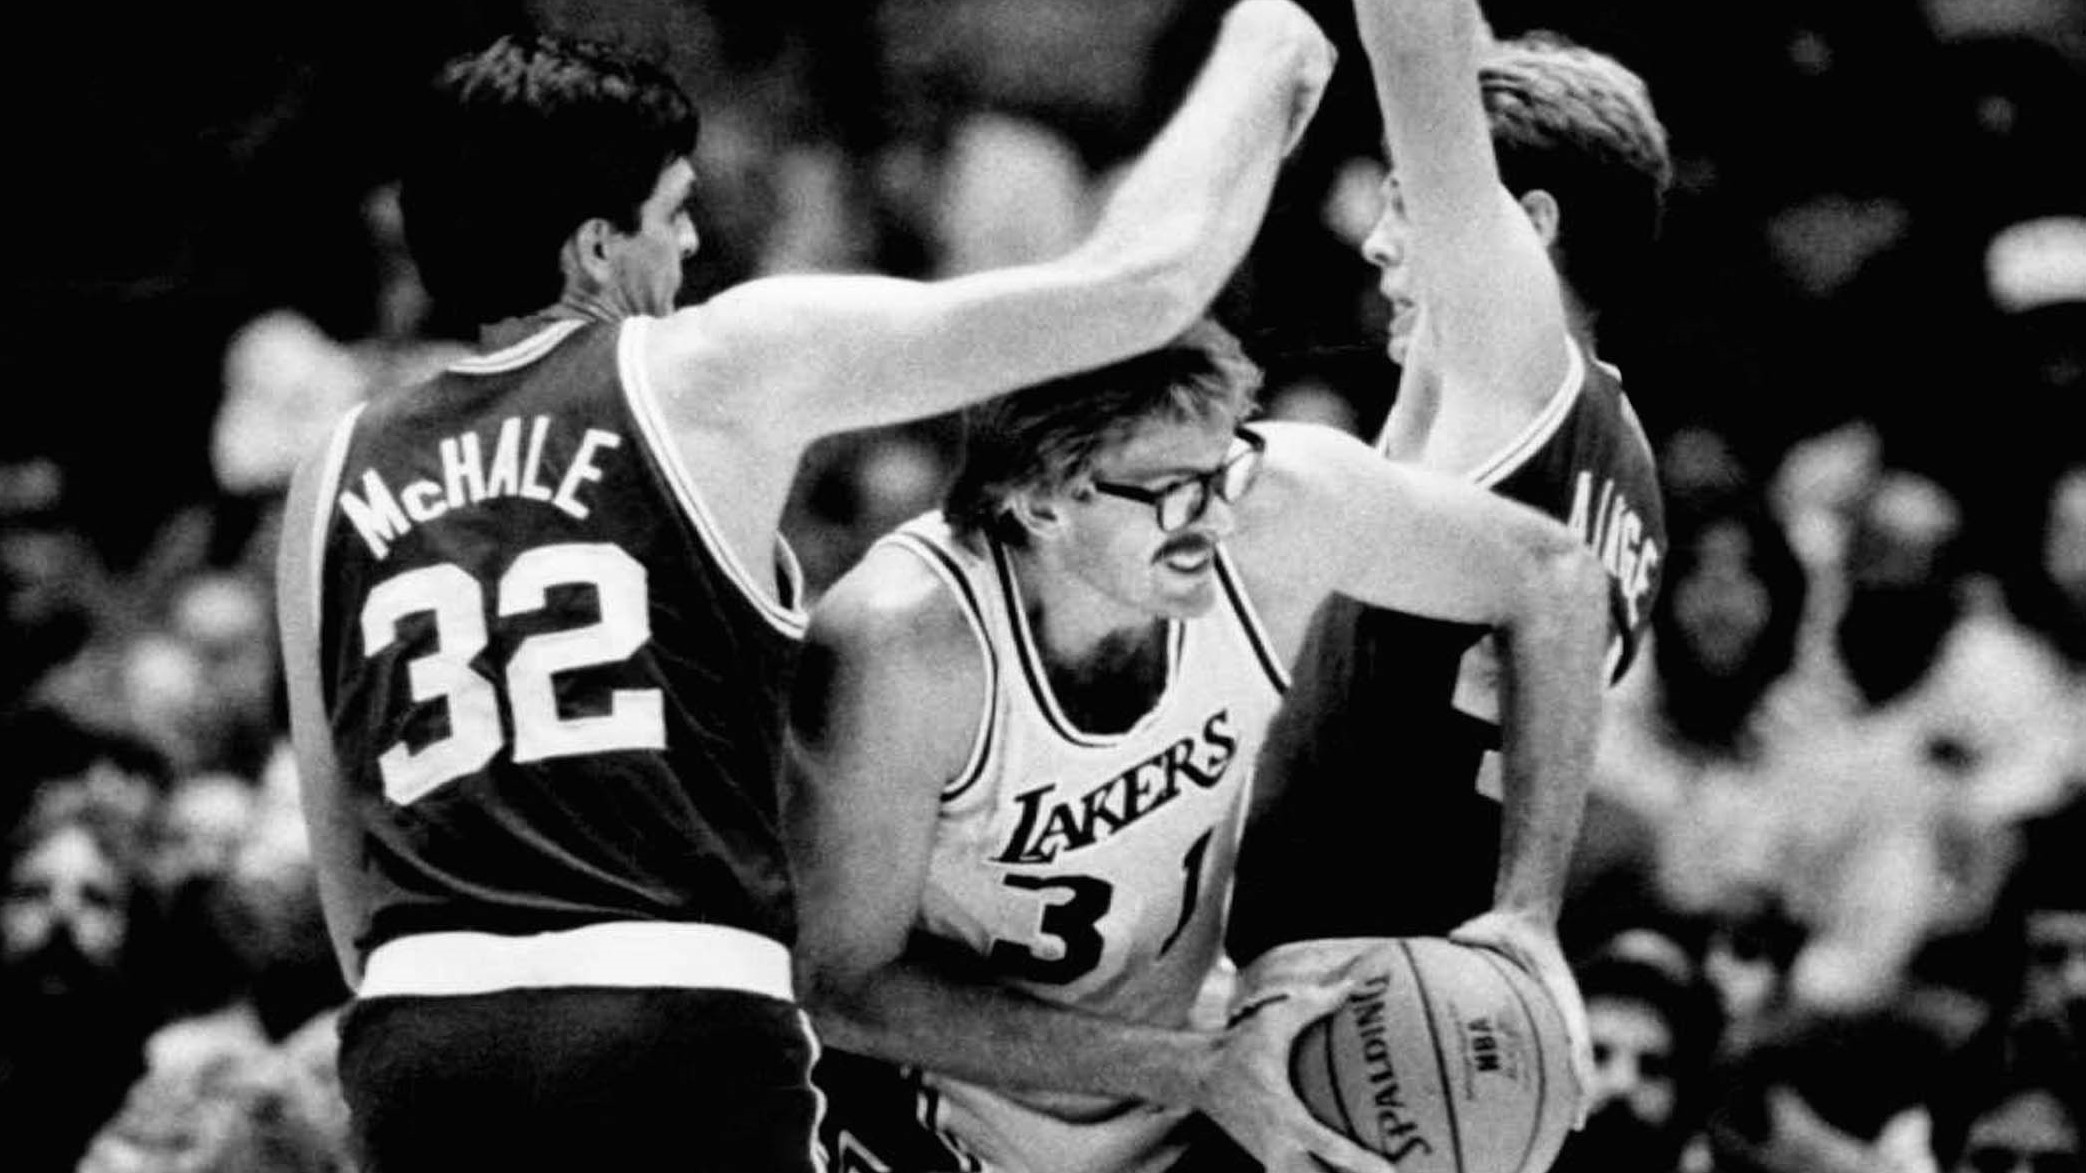 Danny Ainge Kevin Mchale Foul On Kurt Rambis In 1984 Nba Finals Inspirational One Of My Favorite Kevin Plays Ever Masslive Com